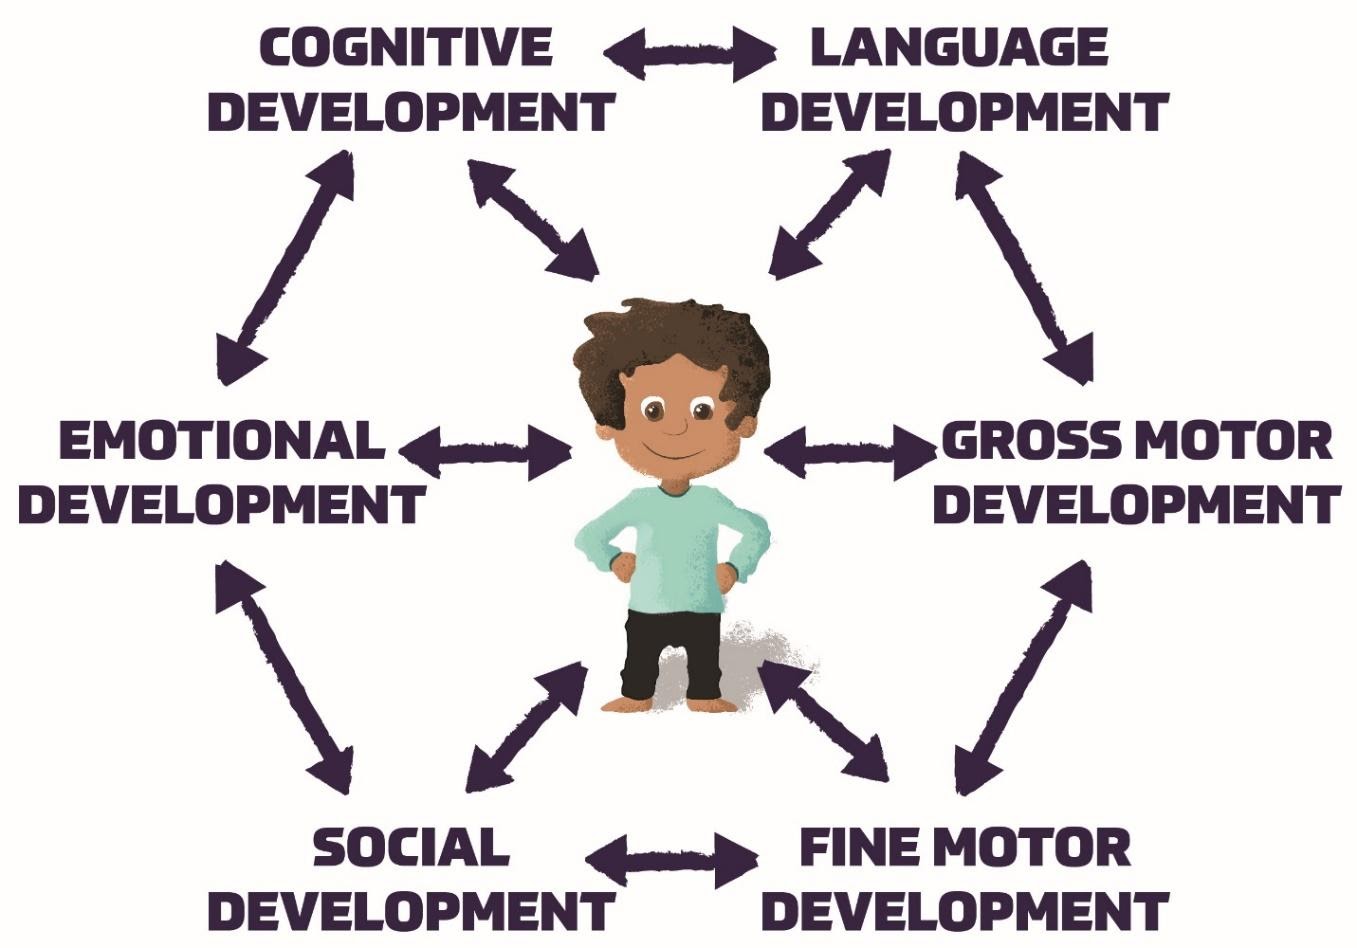 A boy is drawn surrounded by the followinng phrases: cognitive development, language development, gross motor development, fine motor development, social development, and emotional development. All these words, and the boy, are connected by arrows to demonstrate how they intersect. 